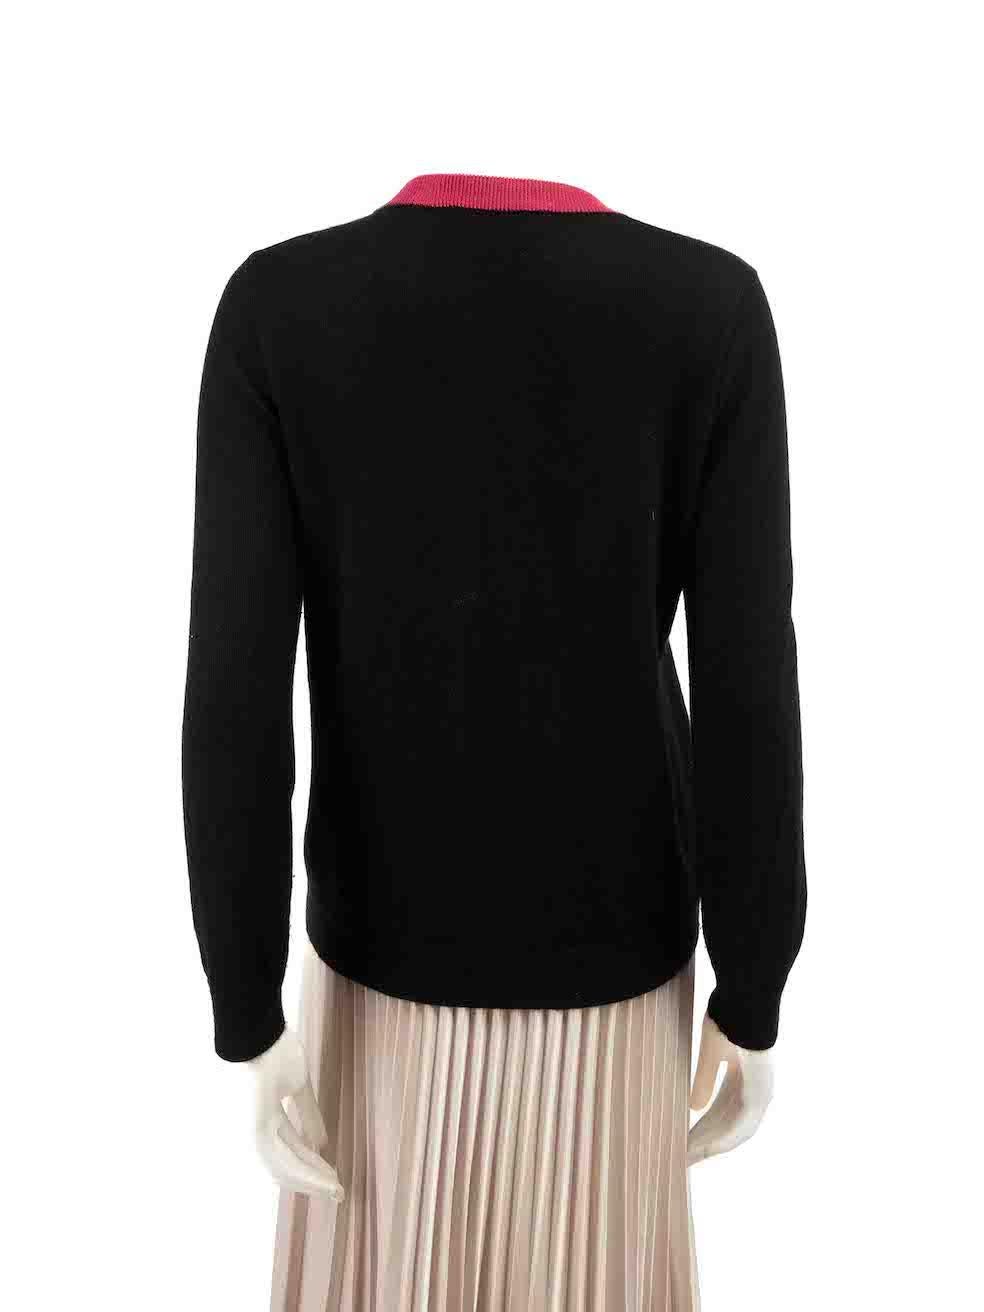 Gucci Black Cashmere LOVED Sequinned Jumper Size XL In Good Condition For Sale In London, GB